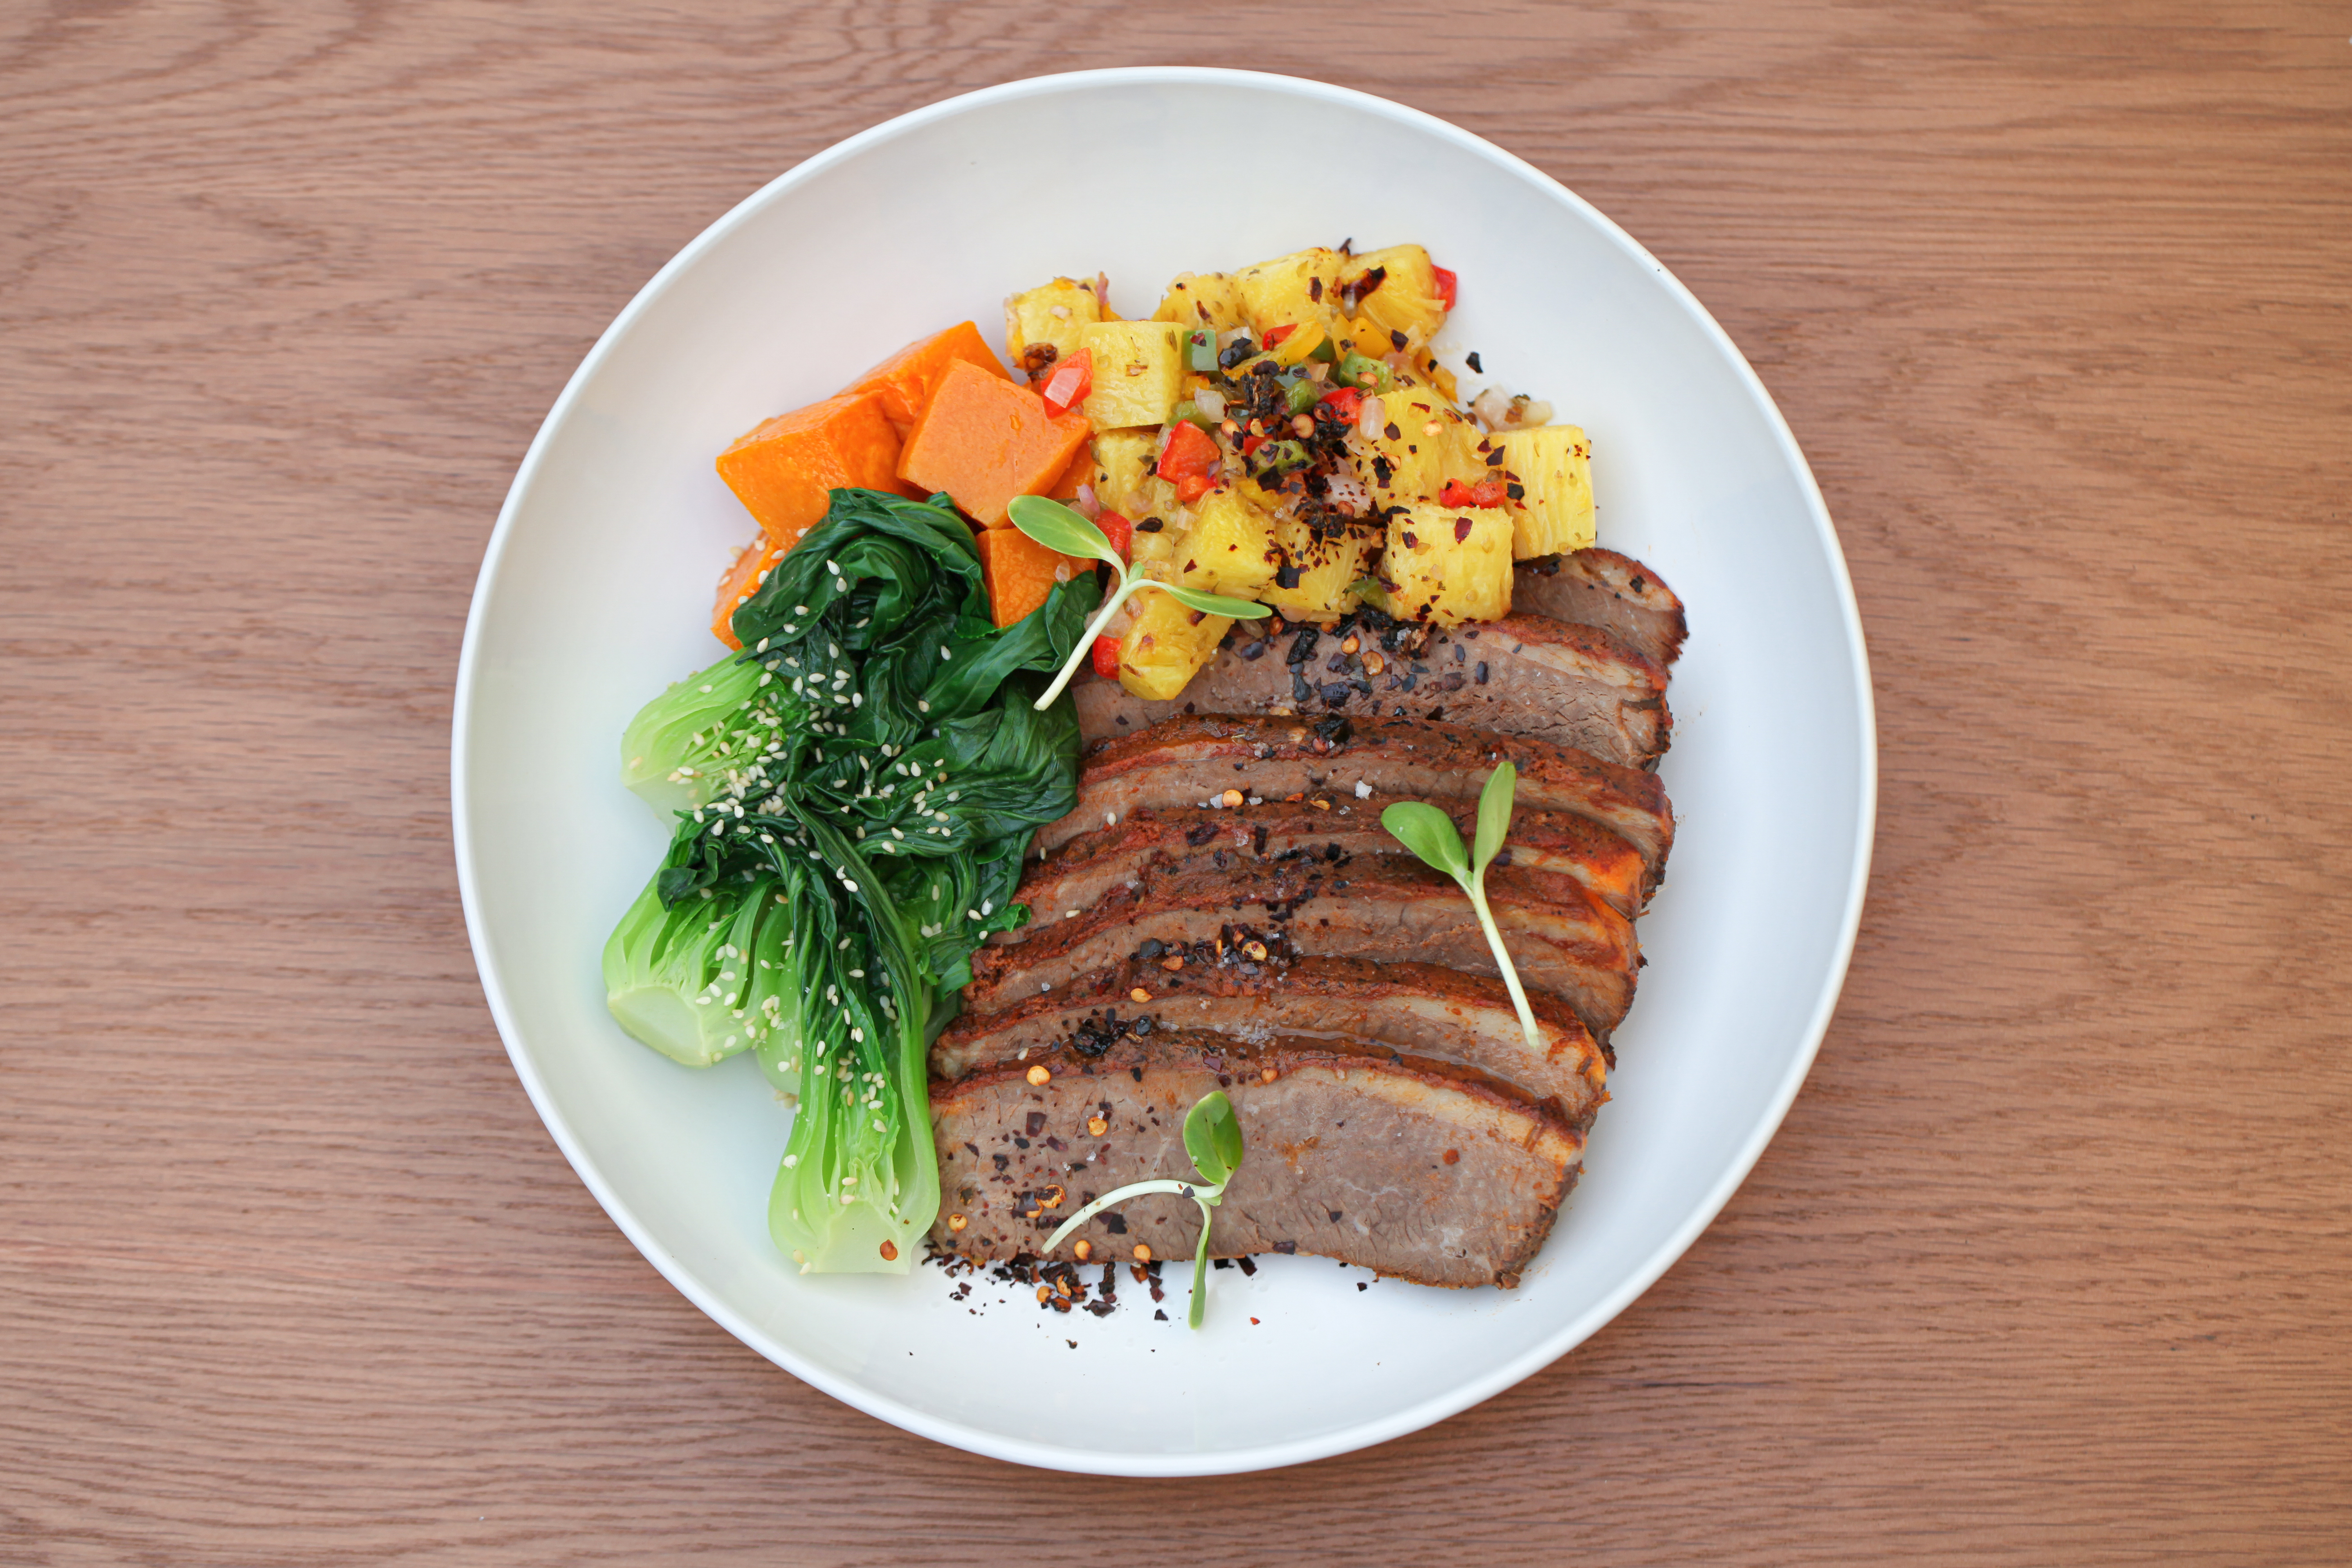 Chipotle beef brisket with roasted pineapple salsa, pumpkin, bok choy